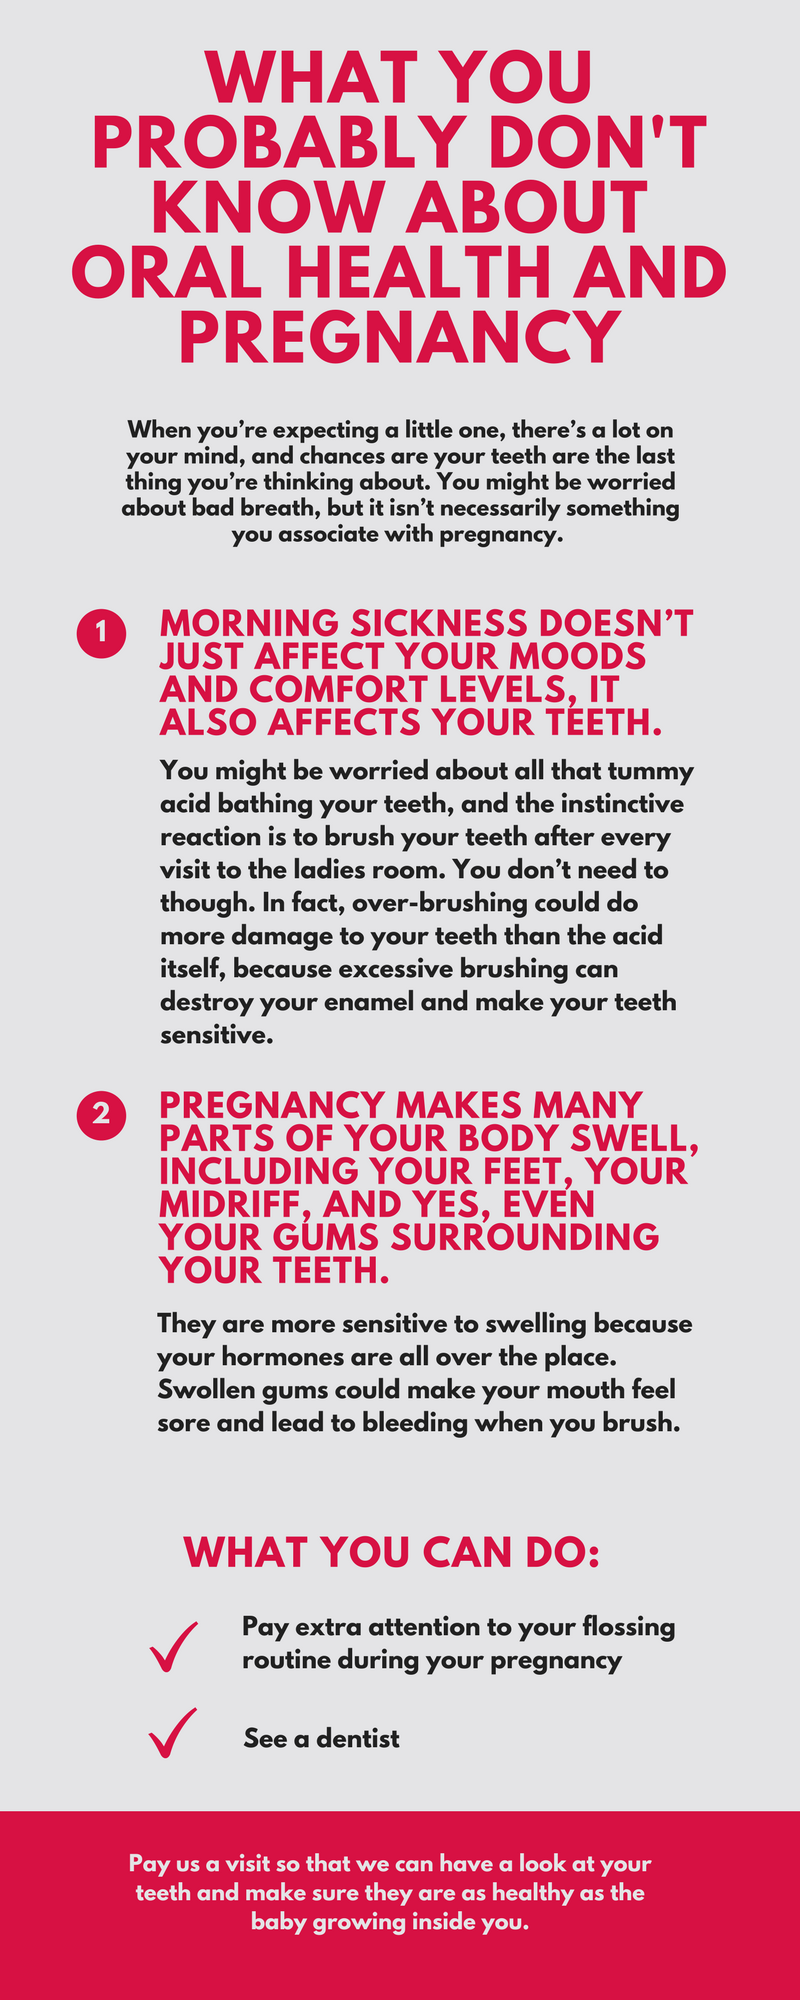 What You Probably Don’t Know About Oral Health and Pregnancy